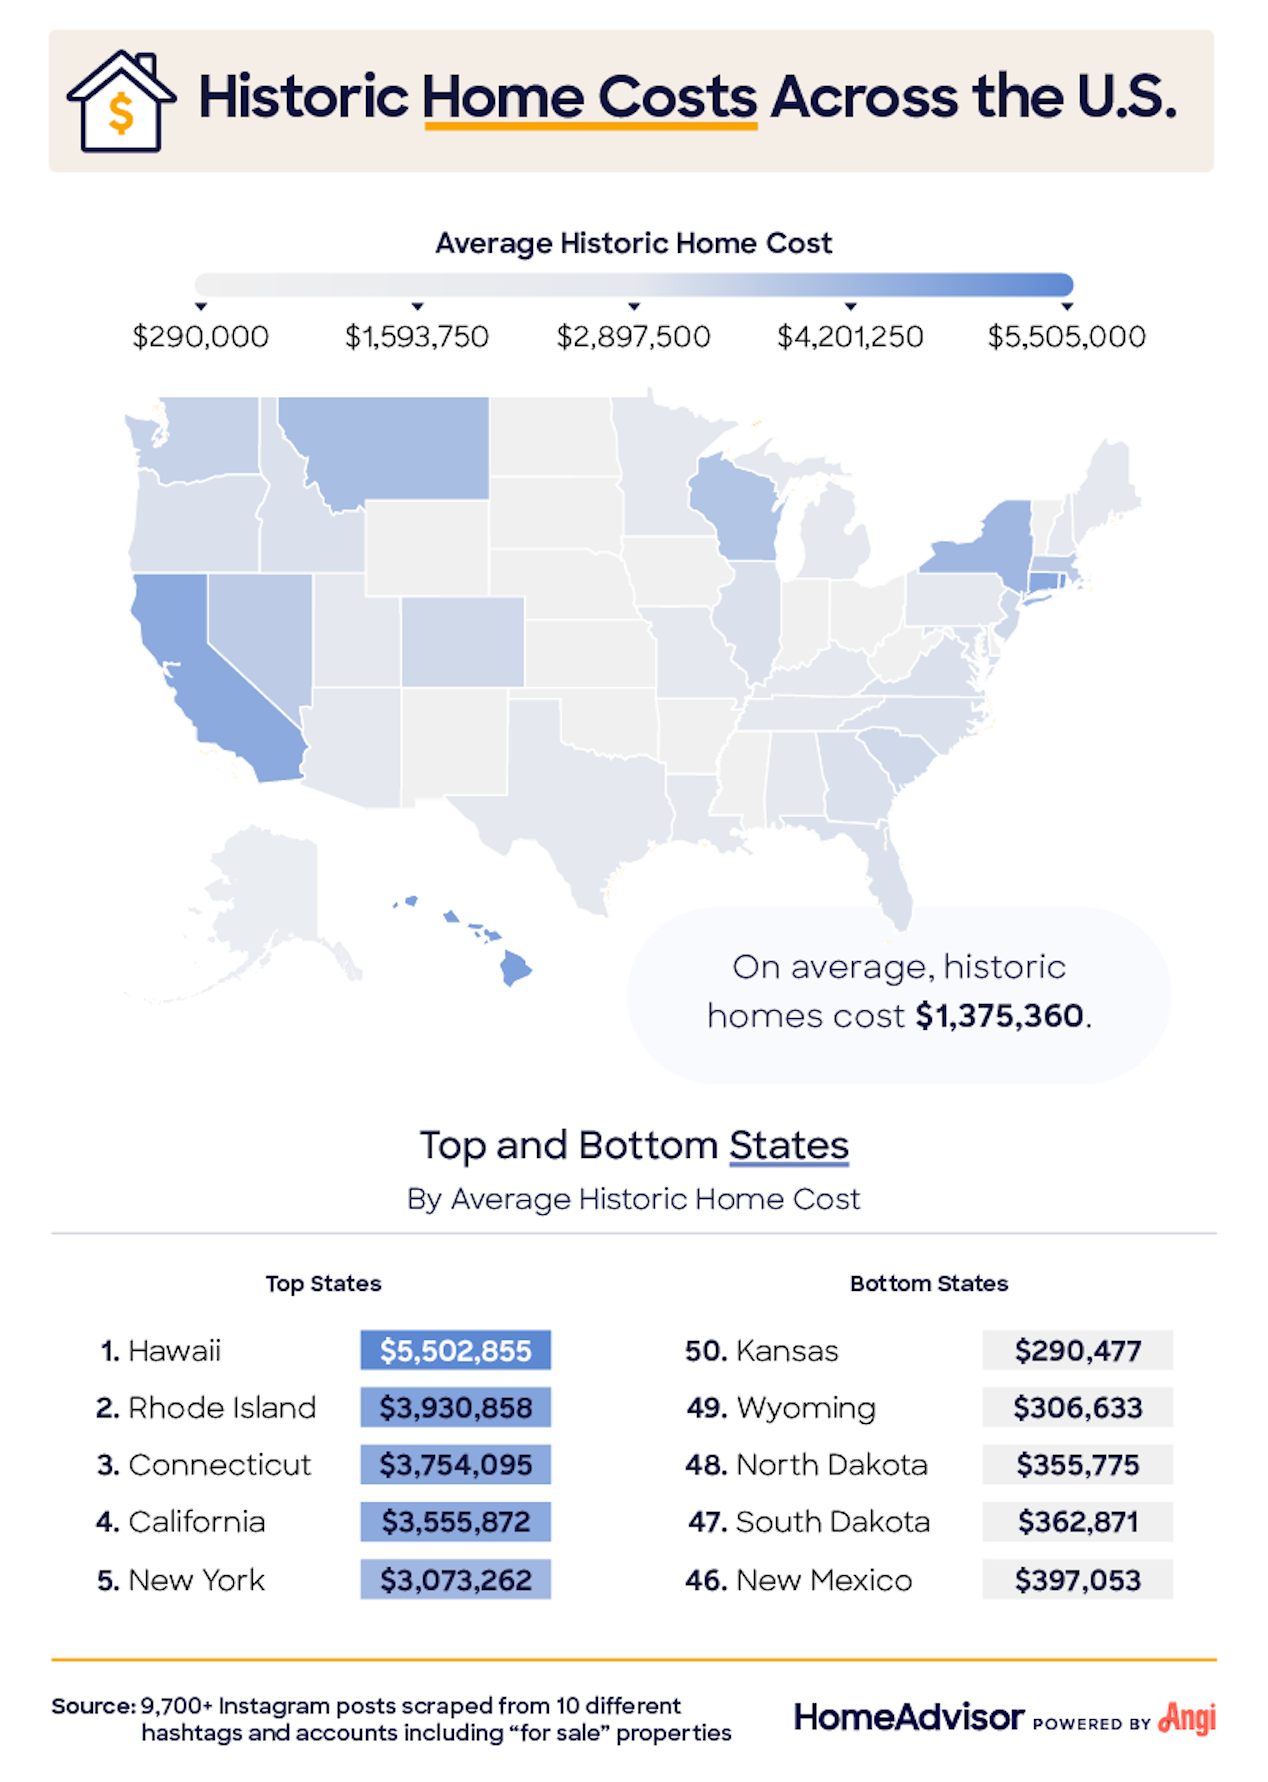 Historic home costs across the U.S.